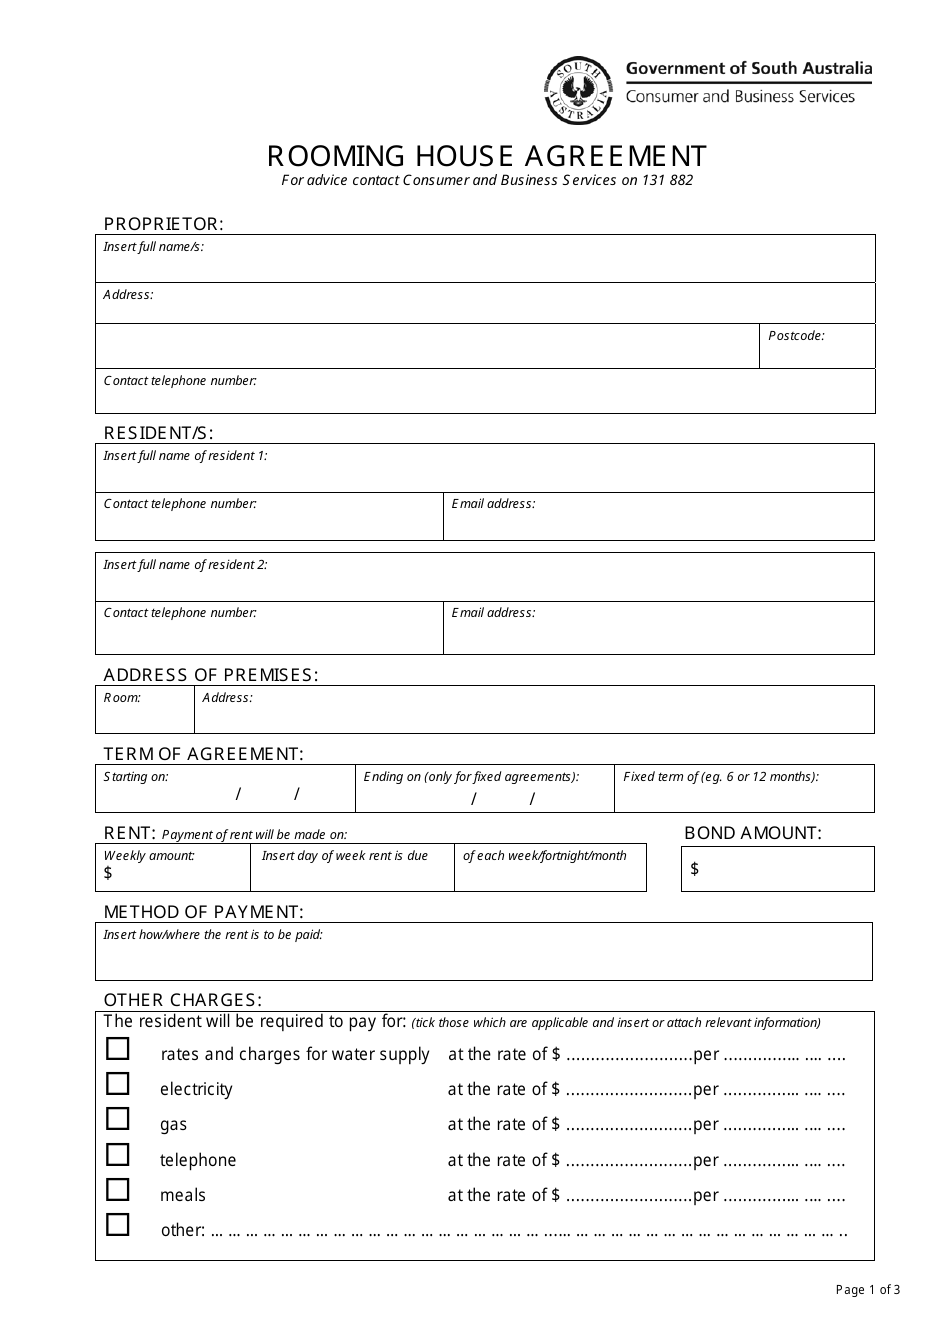 Rooming House Agreement Form - South Australia, Australia, Page 1